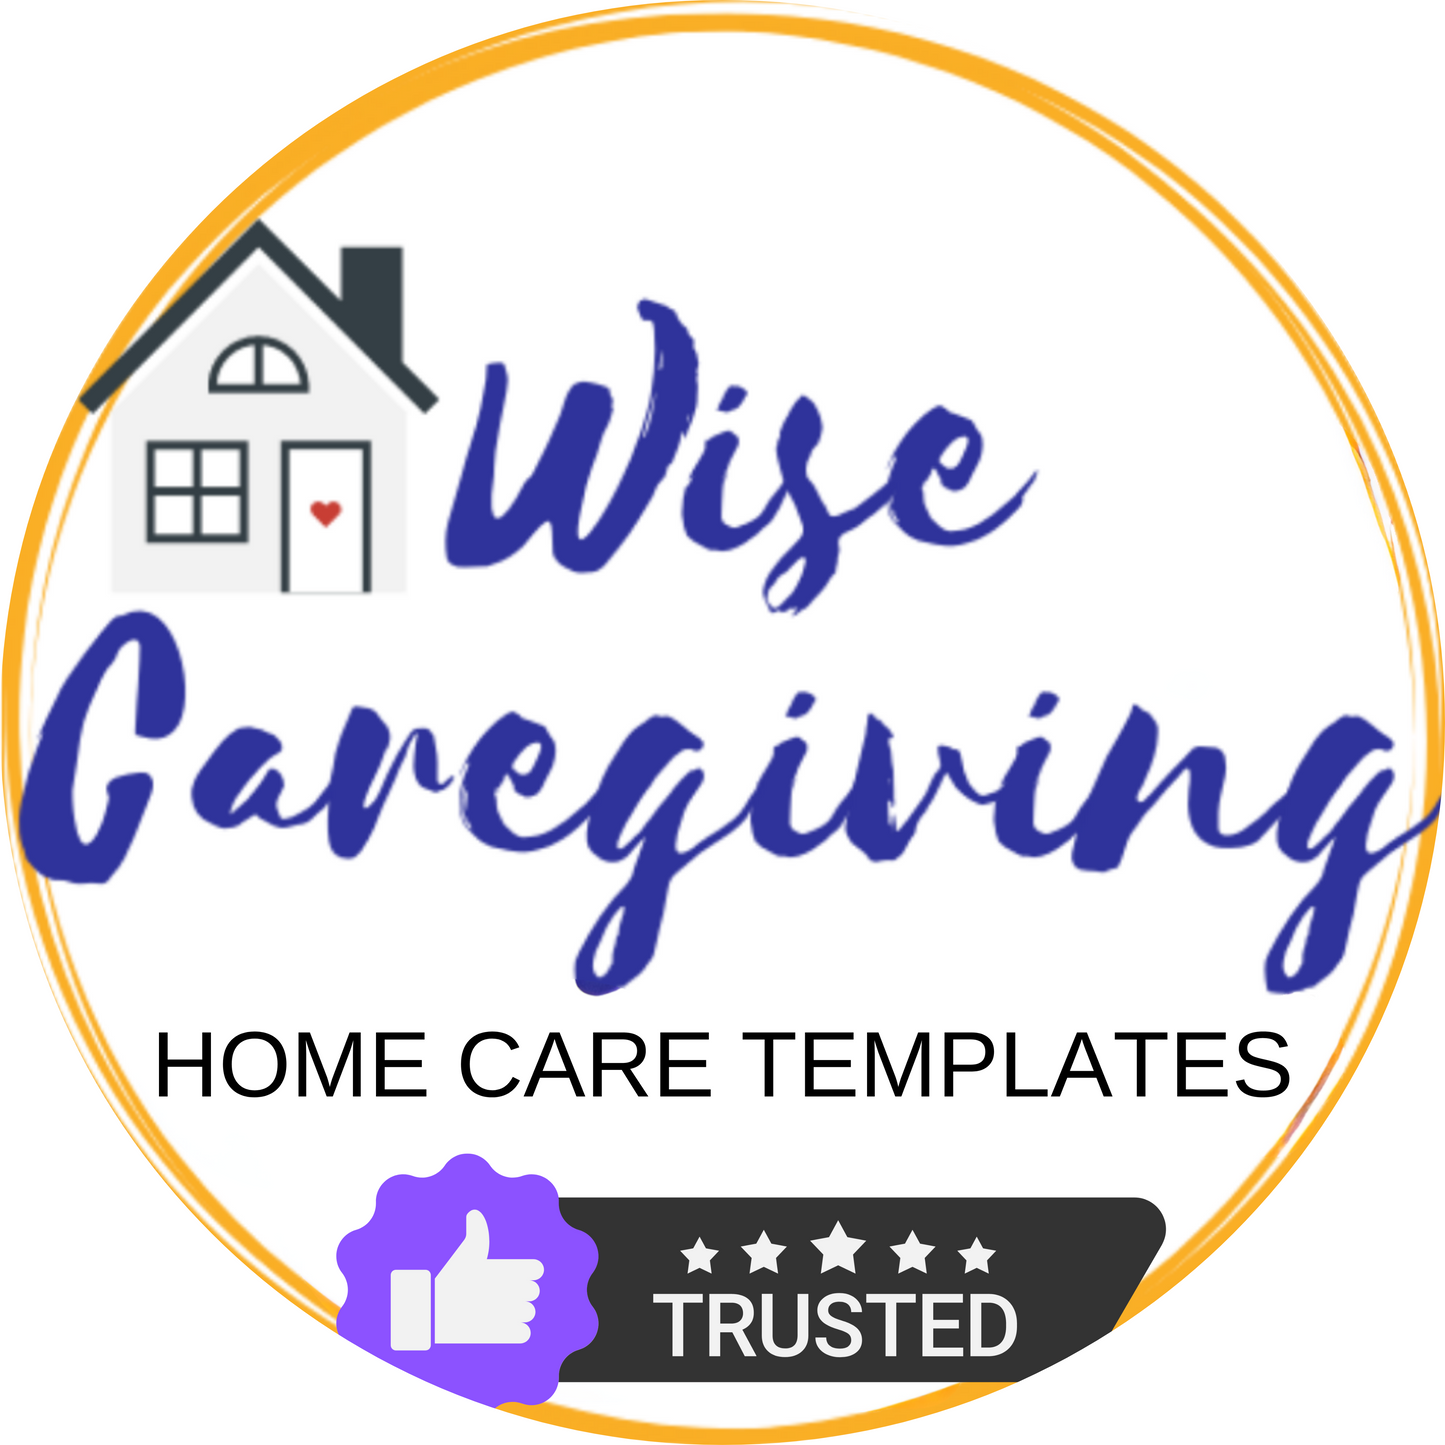 Non-Compete Agreement Template for Home Care Employees